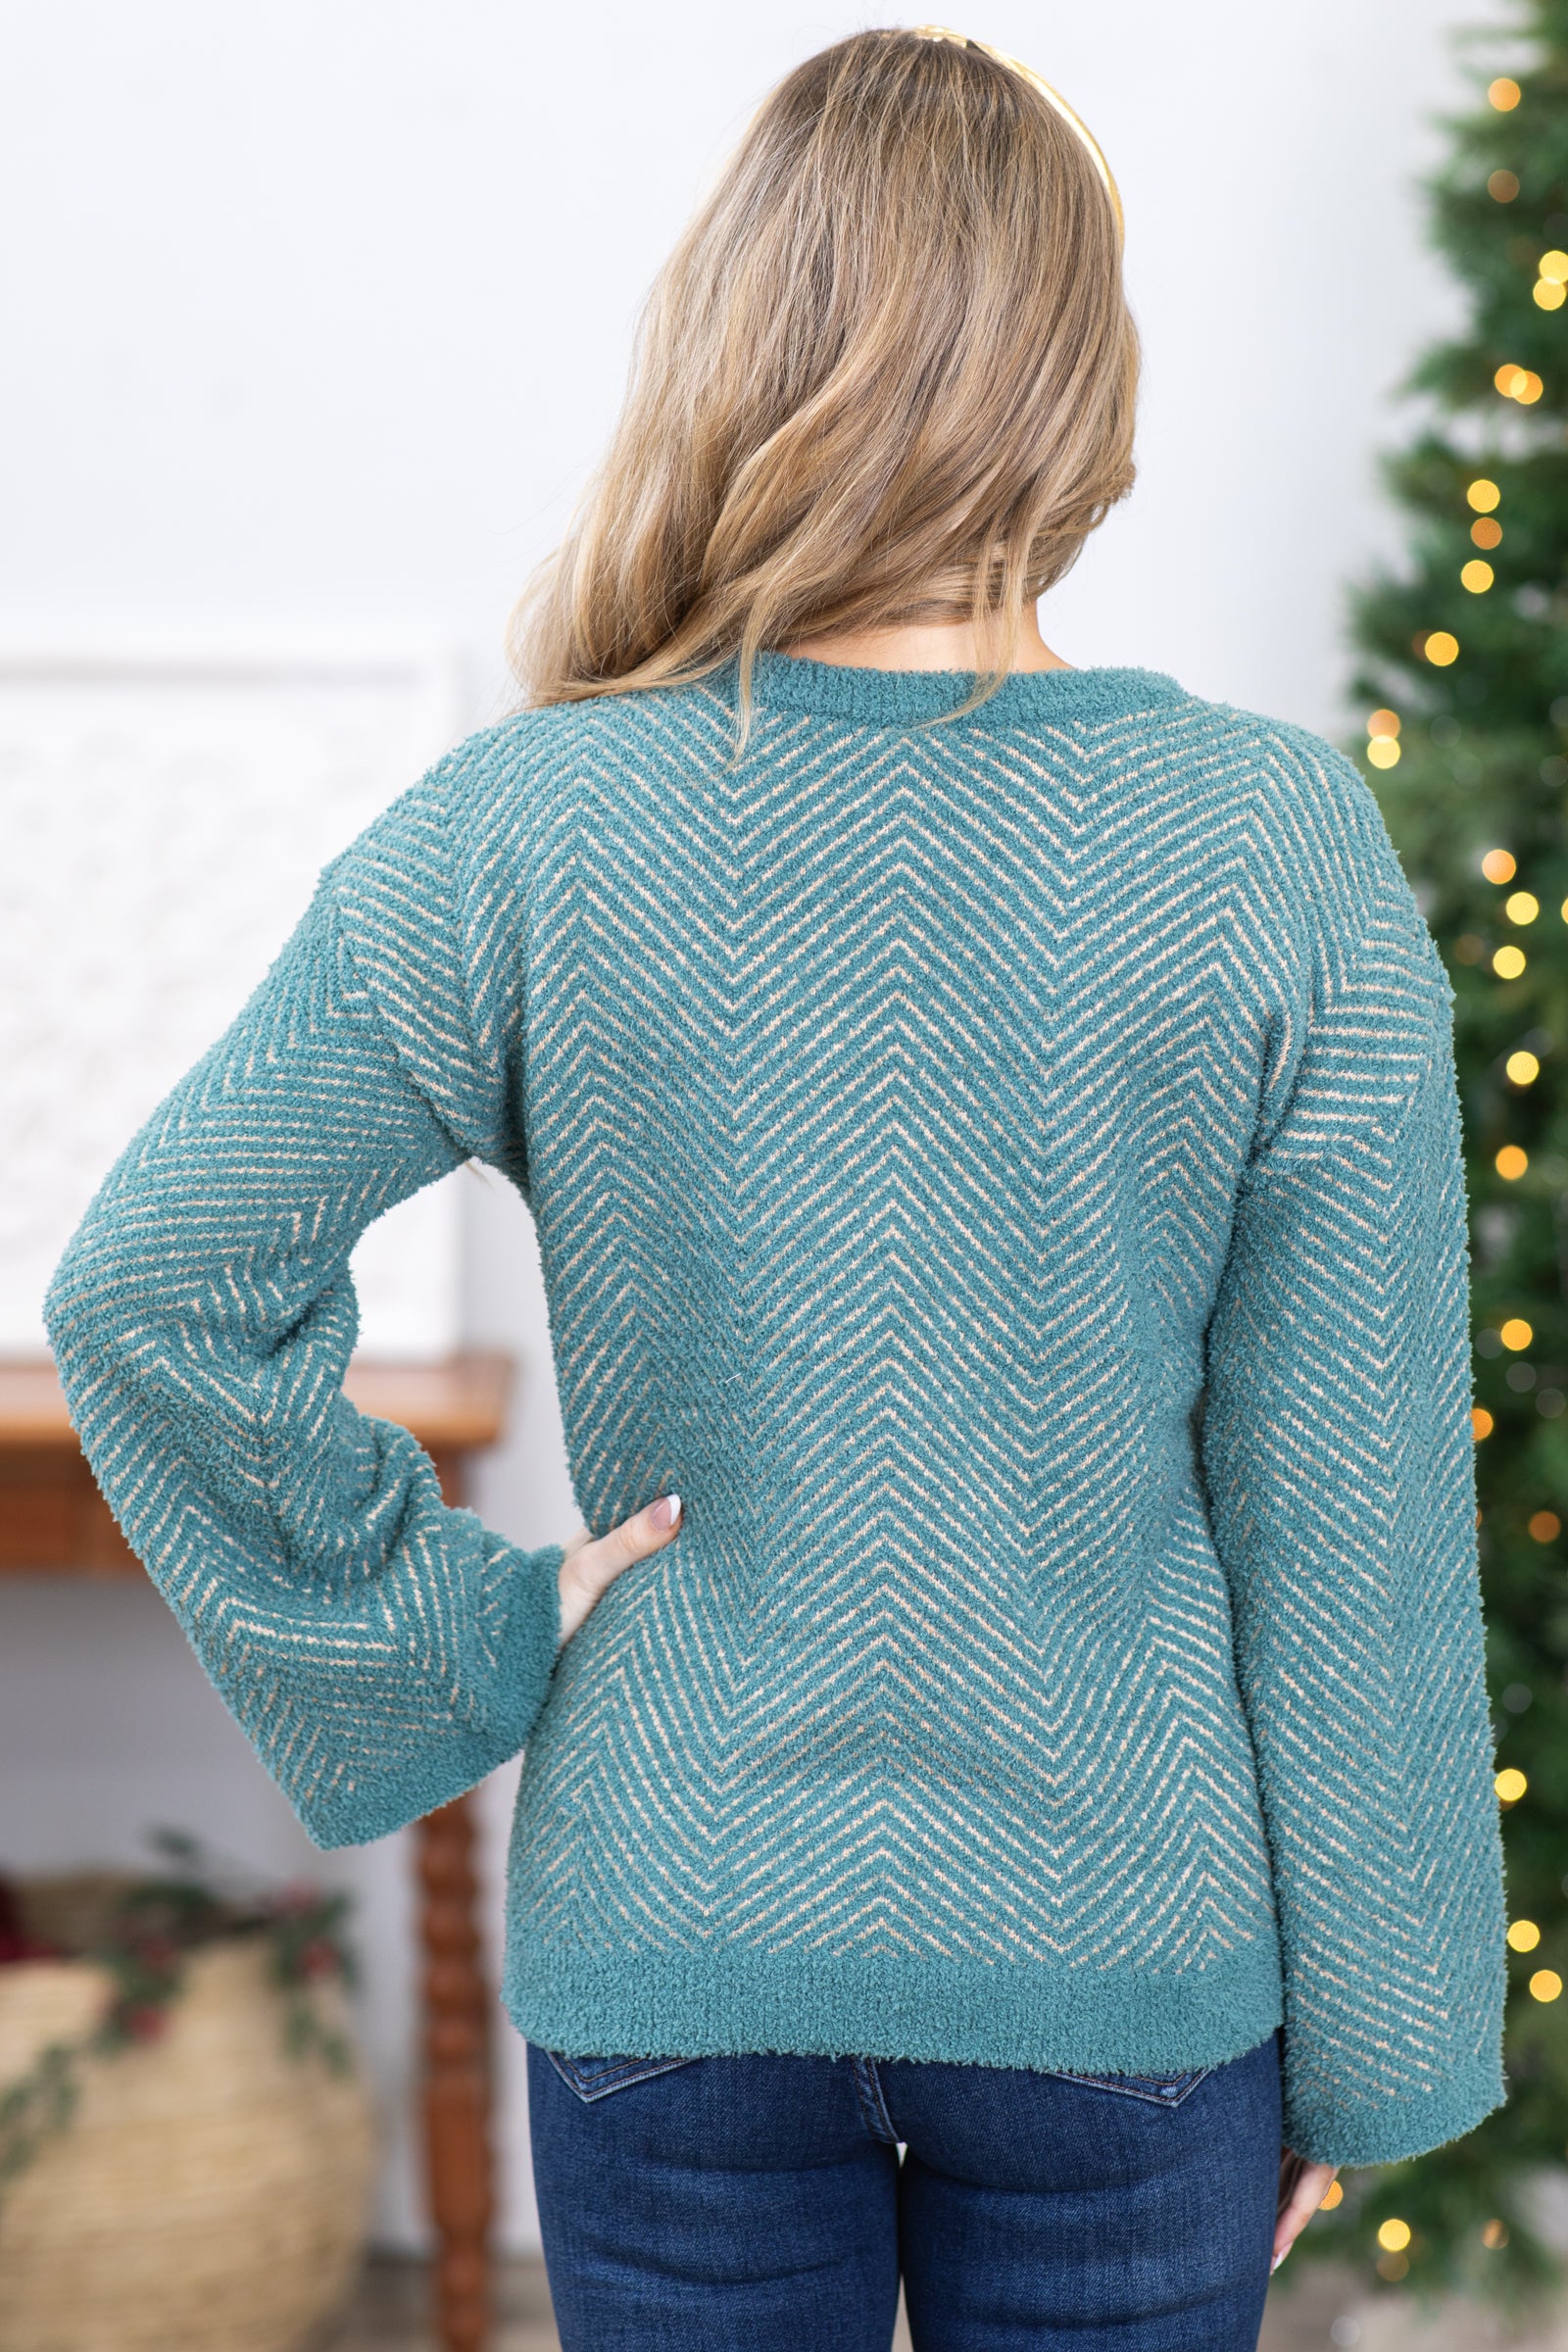 Teal Soft Chevron Sweater With Front Slits